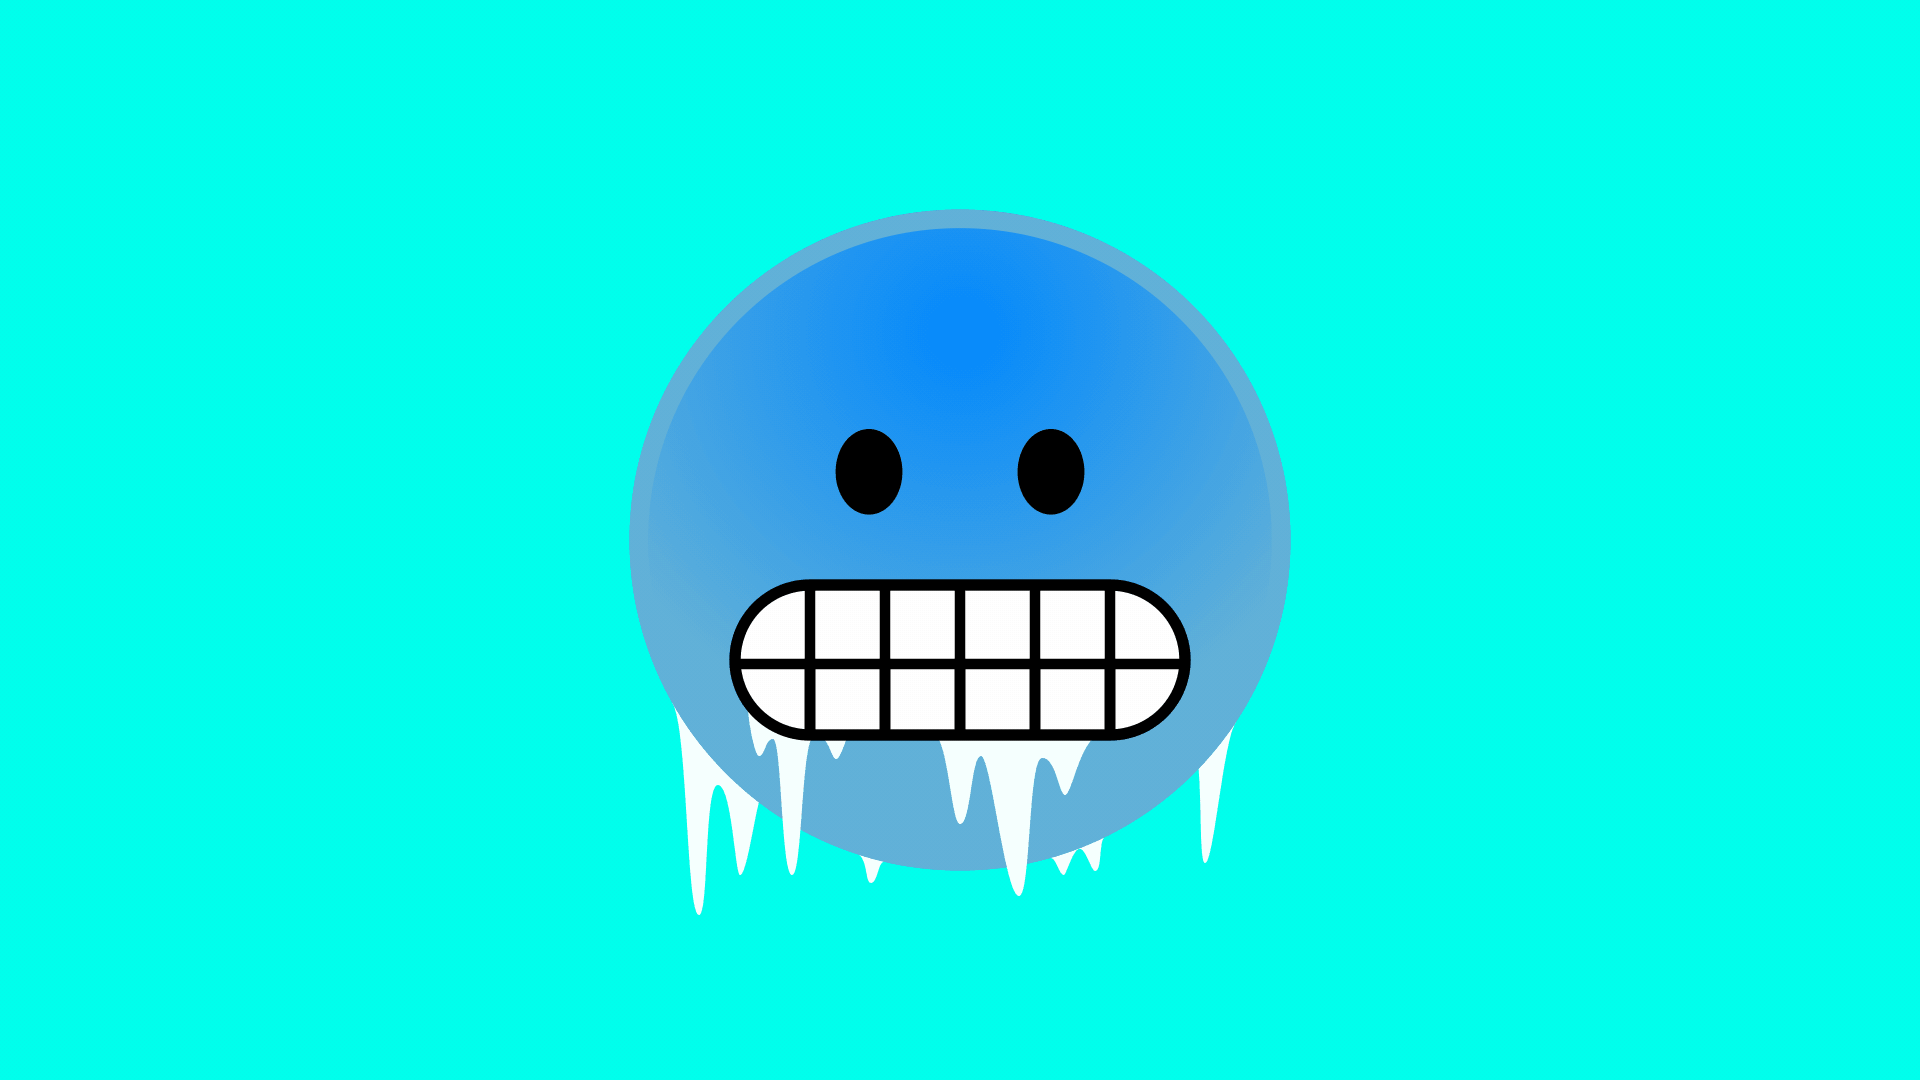 Illustration of a cold emoji chattering its teeth.